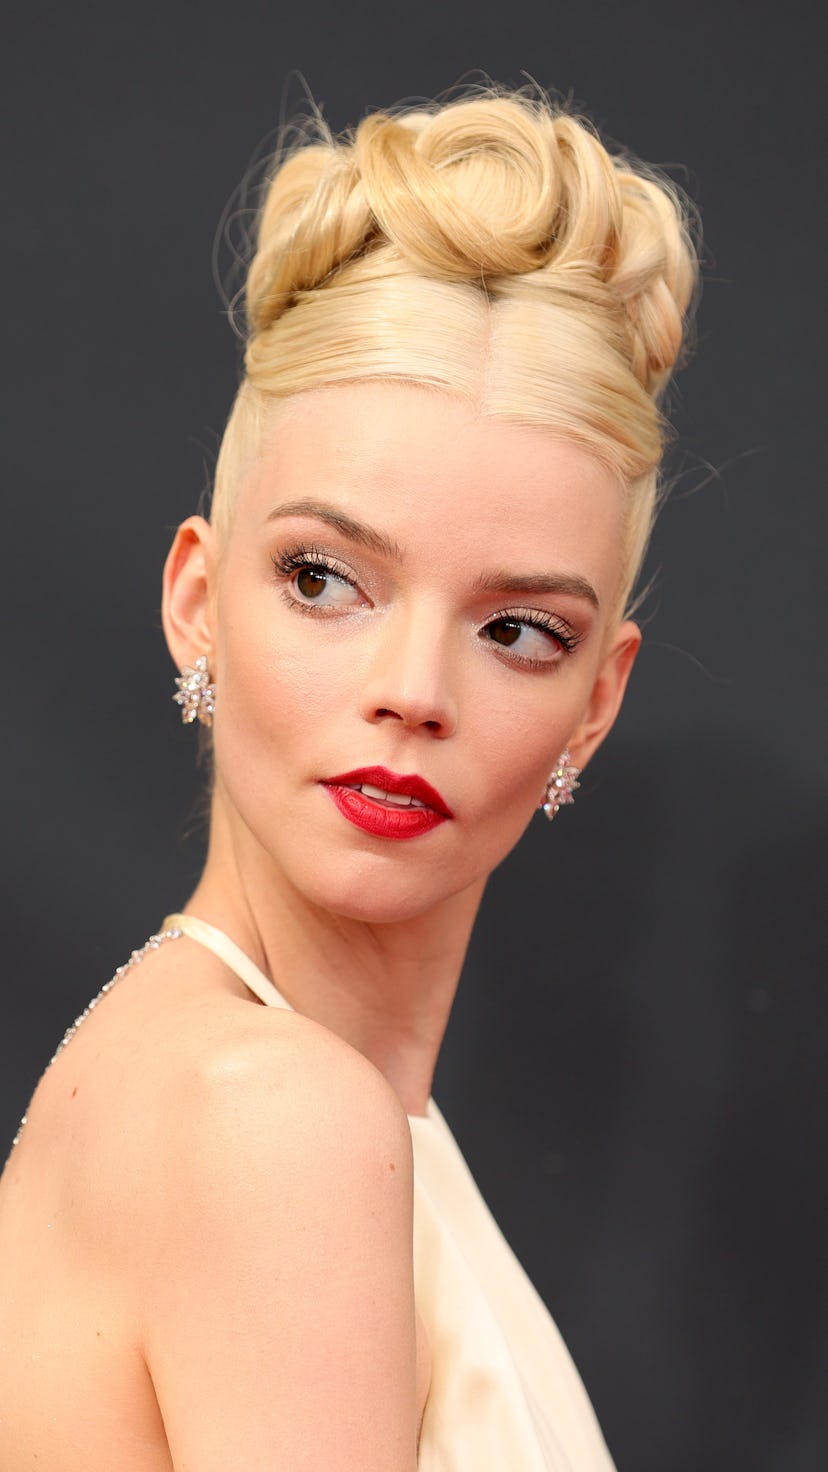 All of the best hairstyles at the 2021 Emmys.